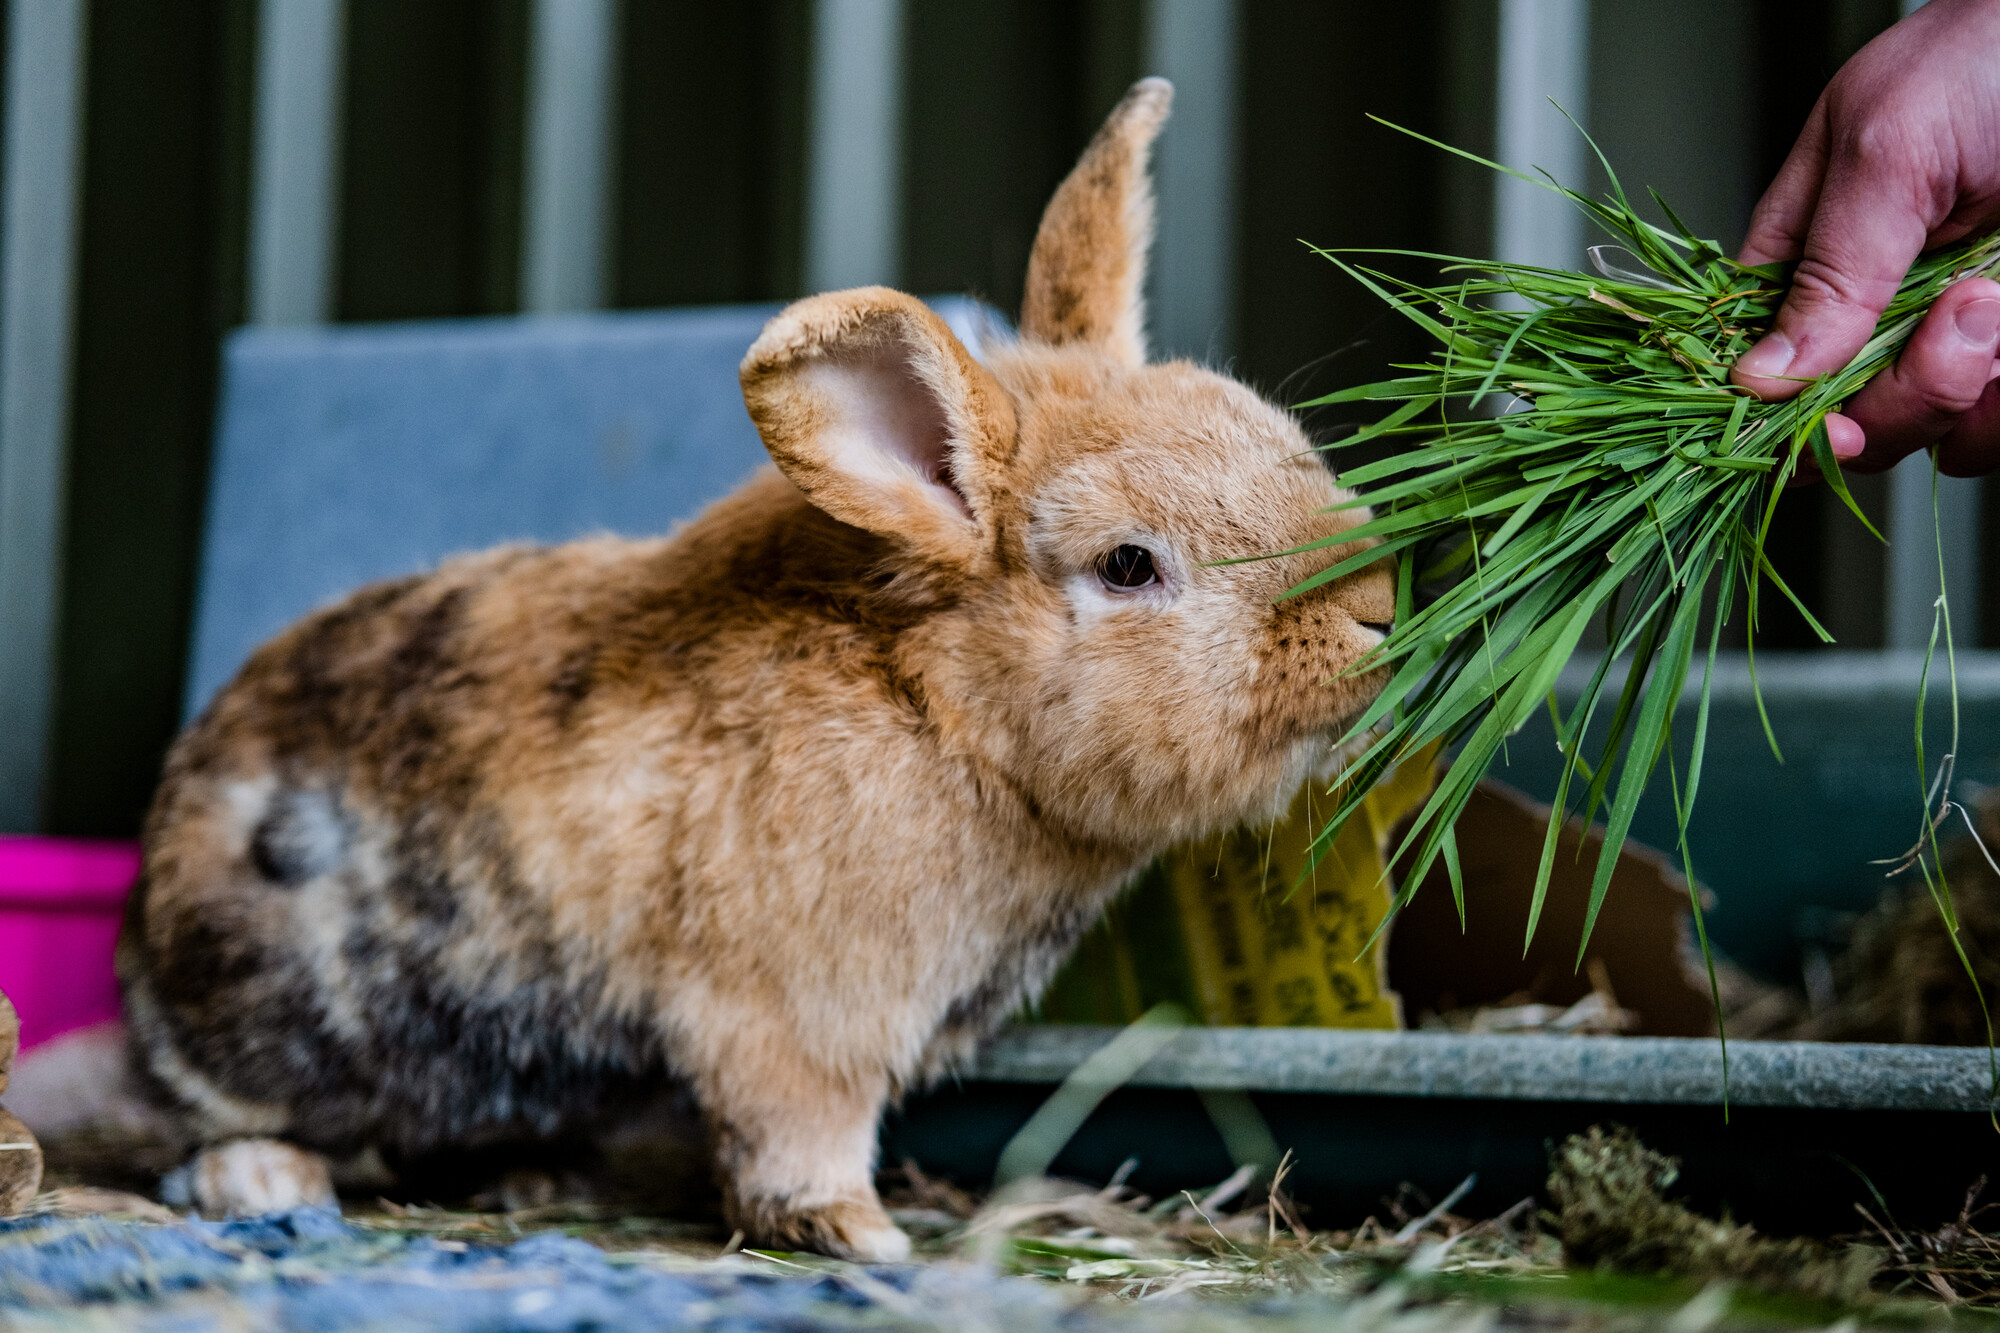 Brown rabbit eating grass from someone's hand